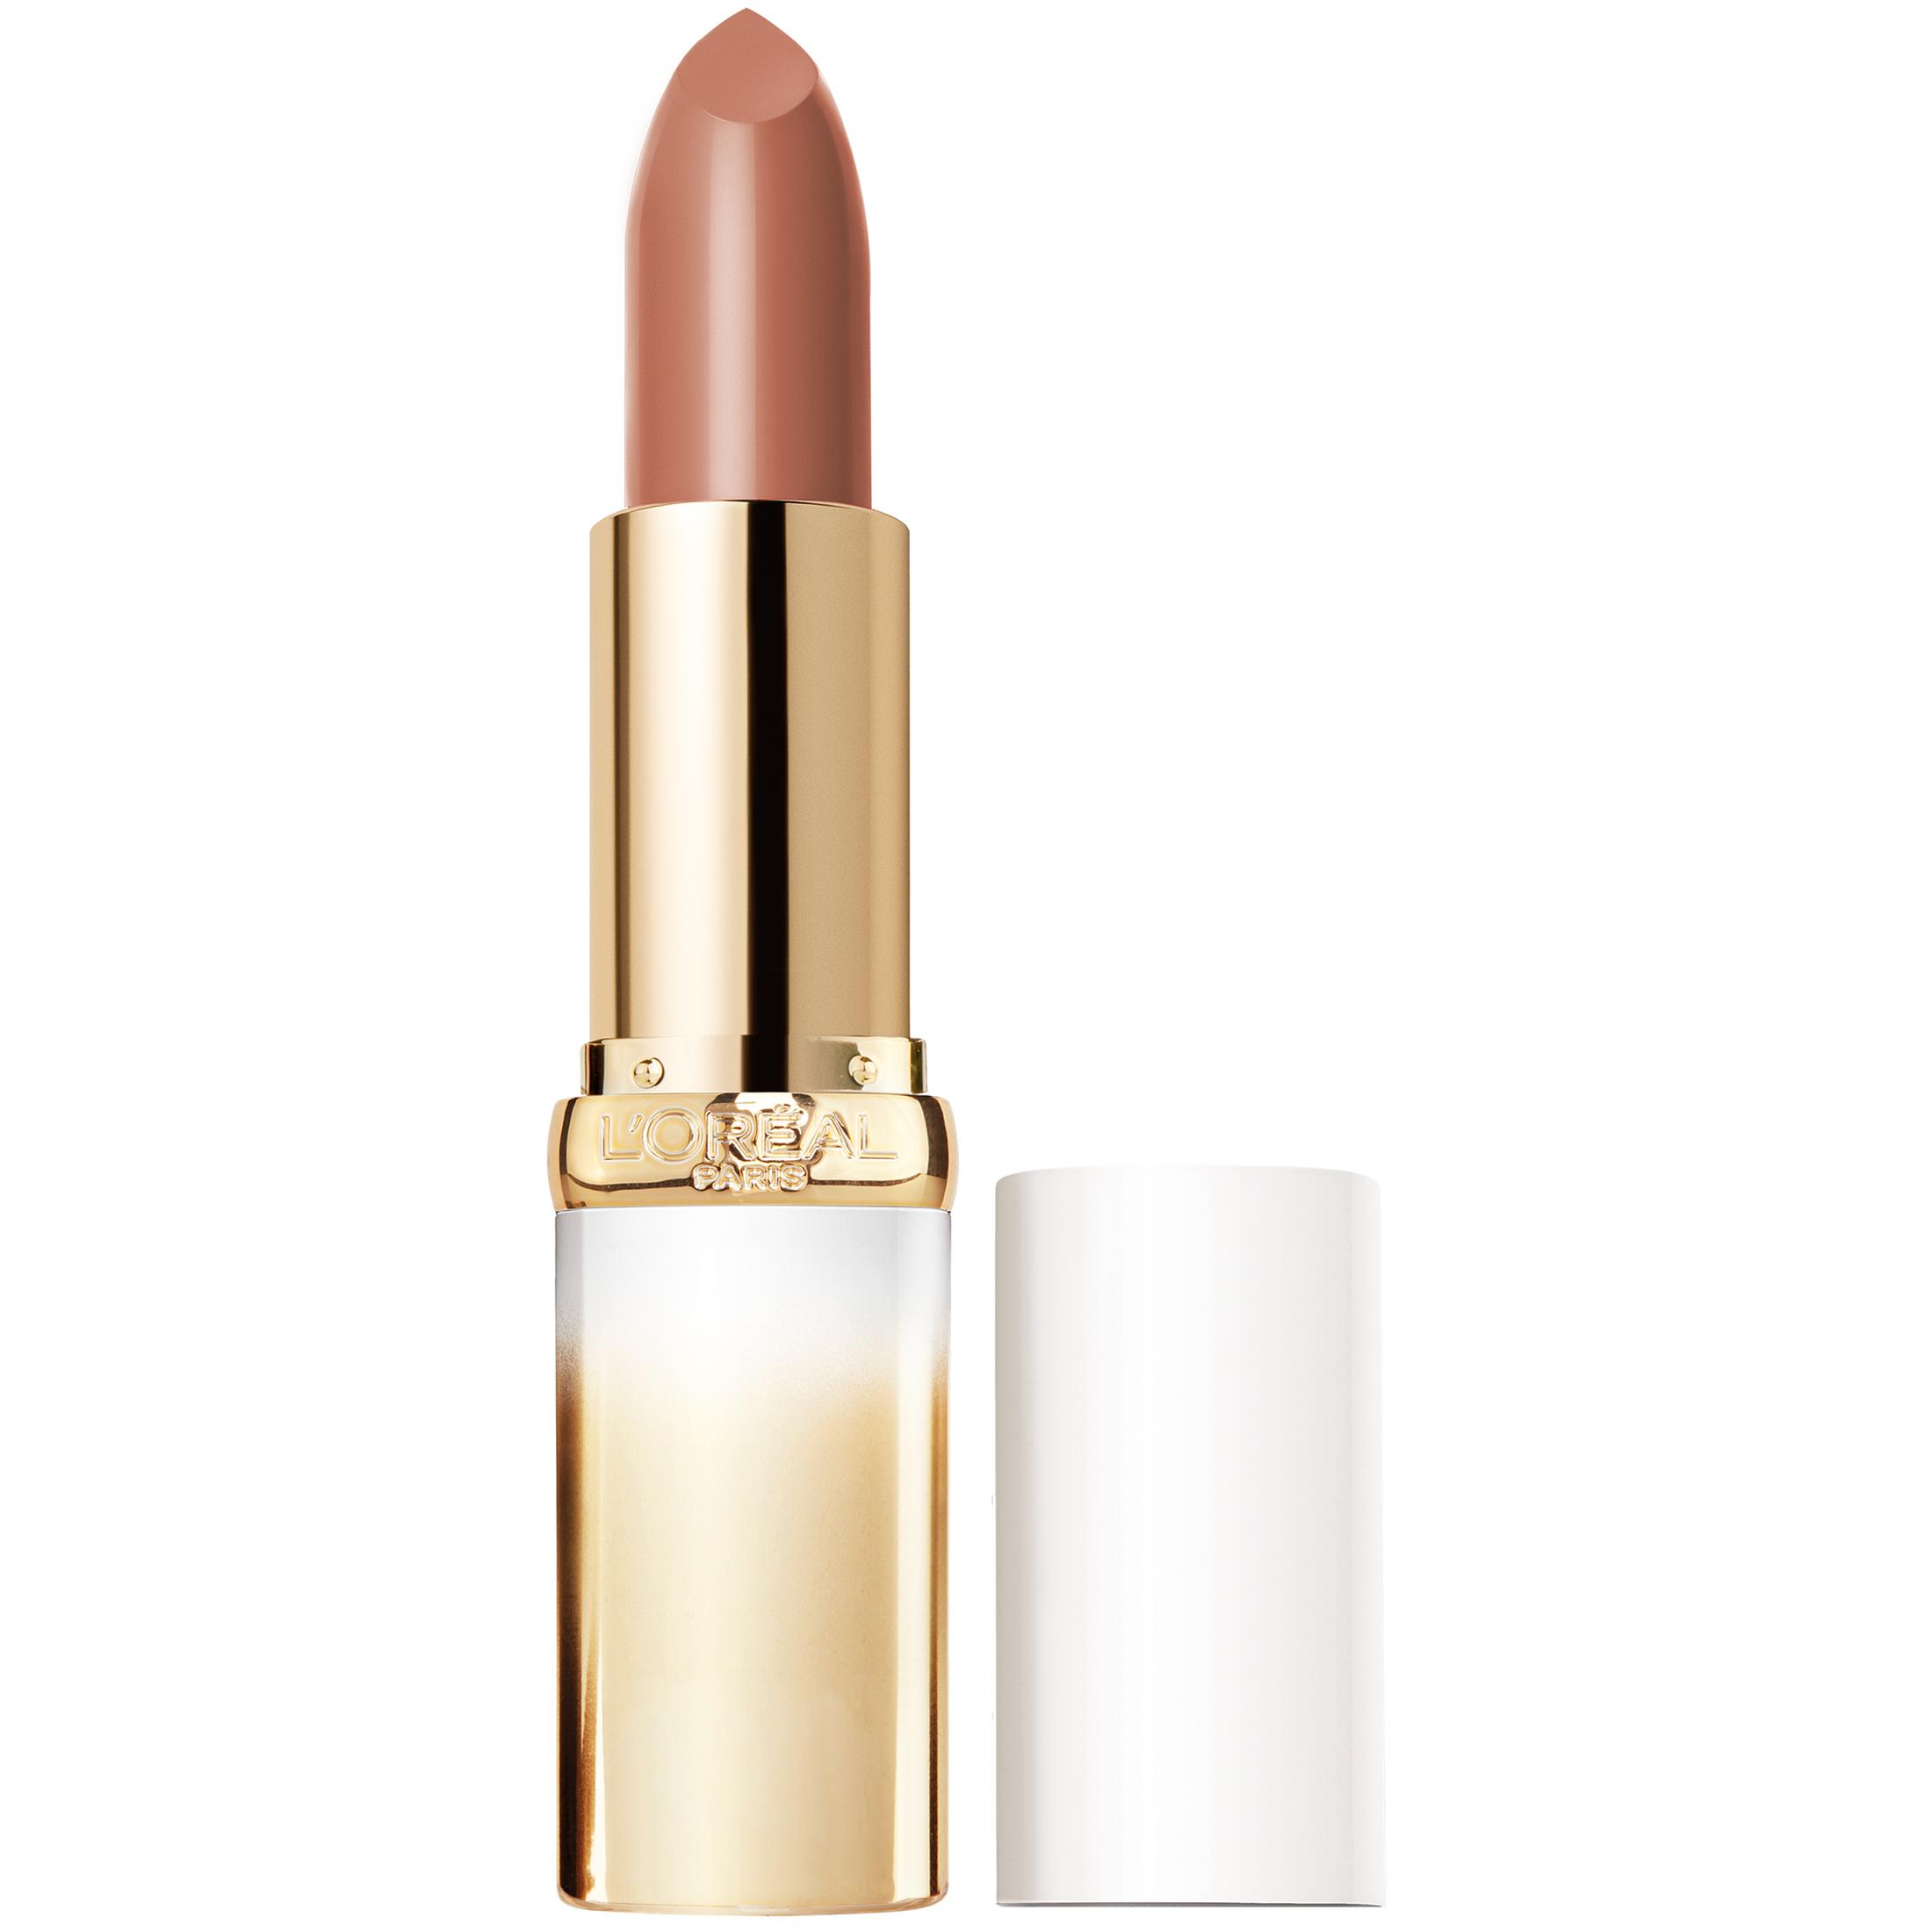 L'Oreal Paris Age Perfect Satin Lipstick, Glowing Nude - image 1 of 12